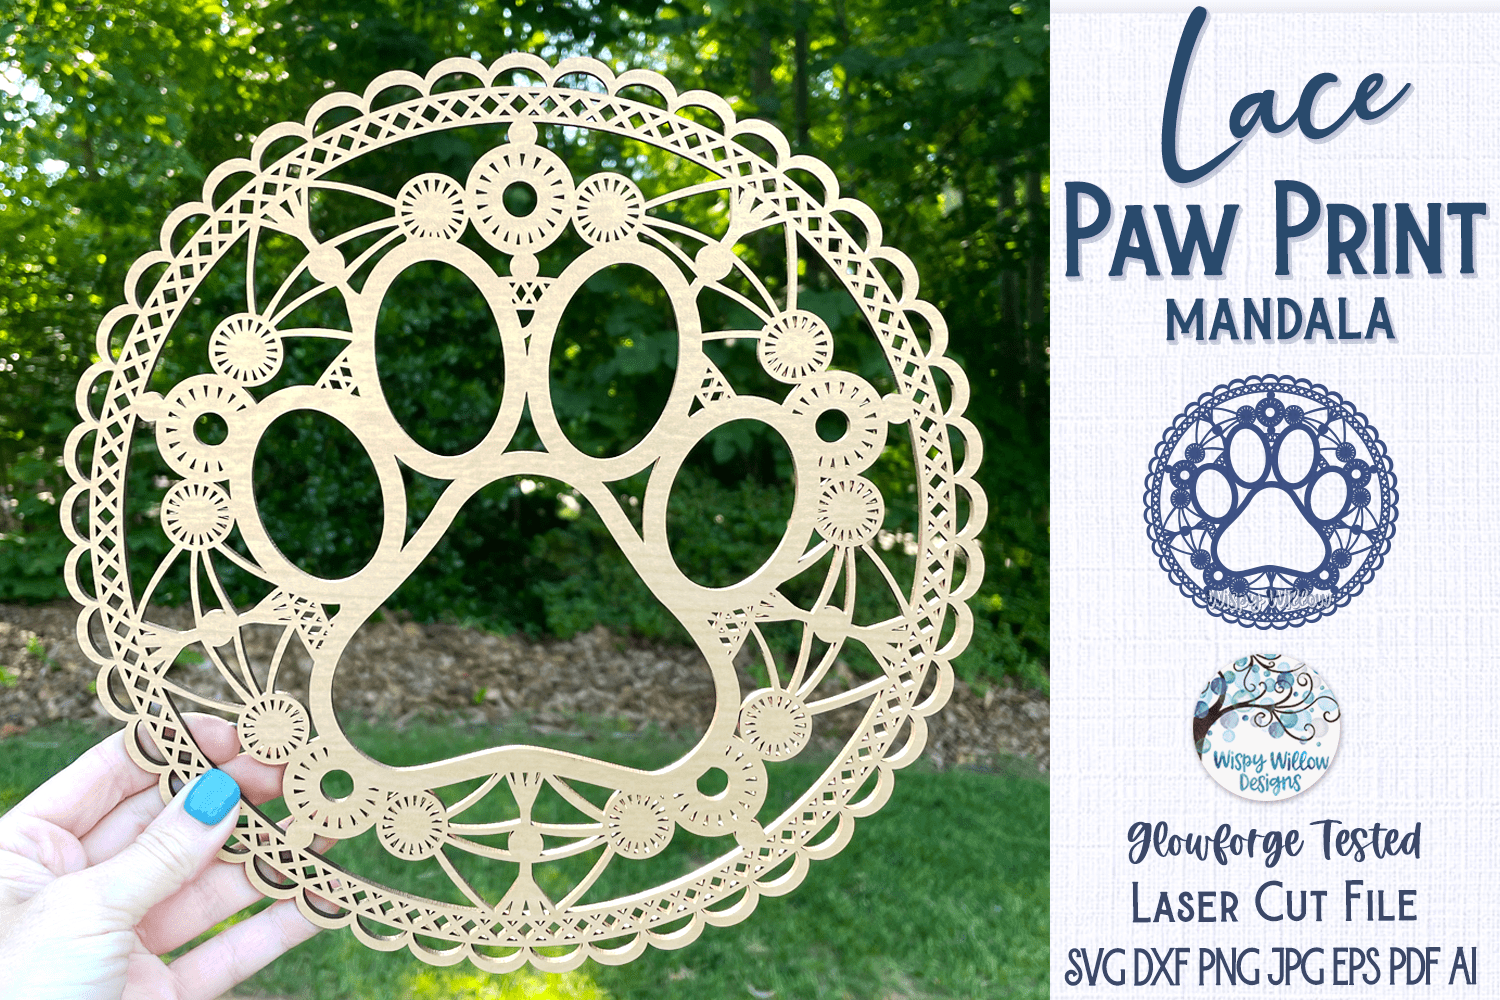 Lace Pet Paw Print Mandala for Laser or Glowforge Wispy Willow Designs Company